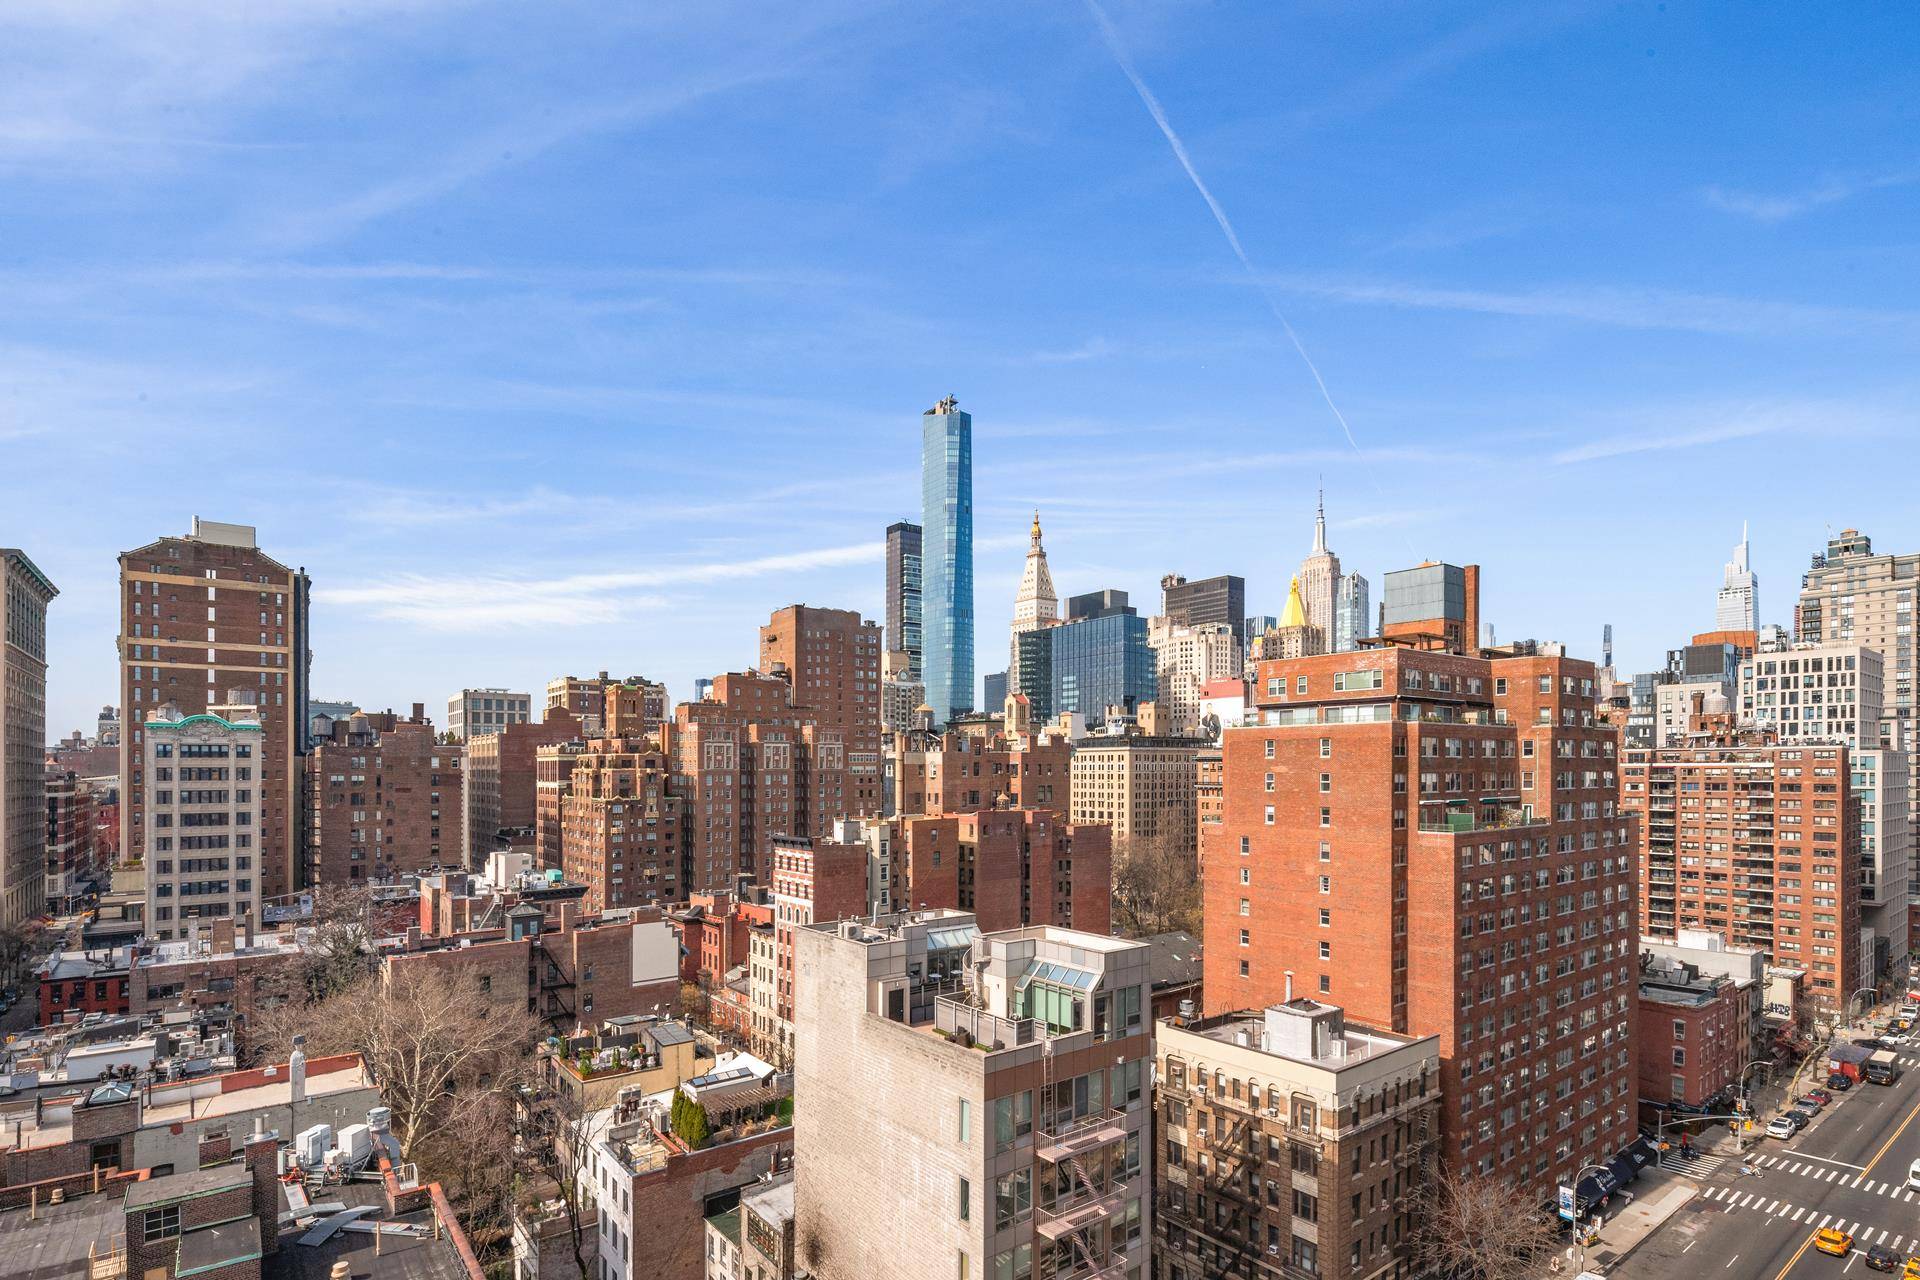 Welcome home to Apt 17F, a one bed one bath in Gramercy Park Towers !